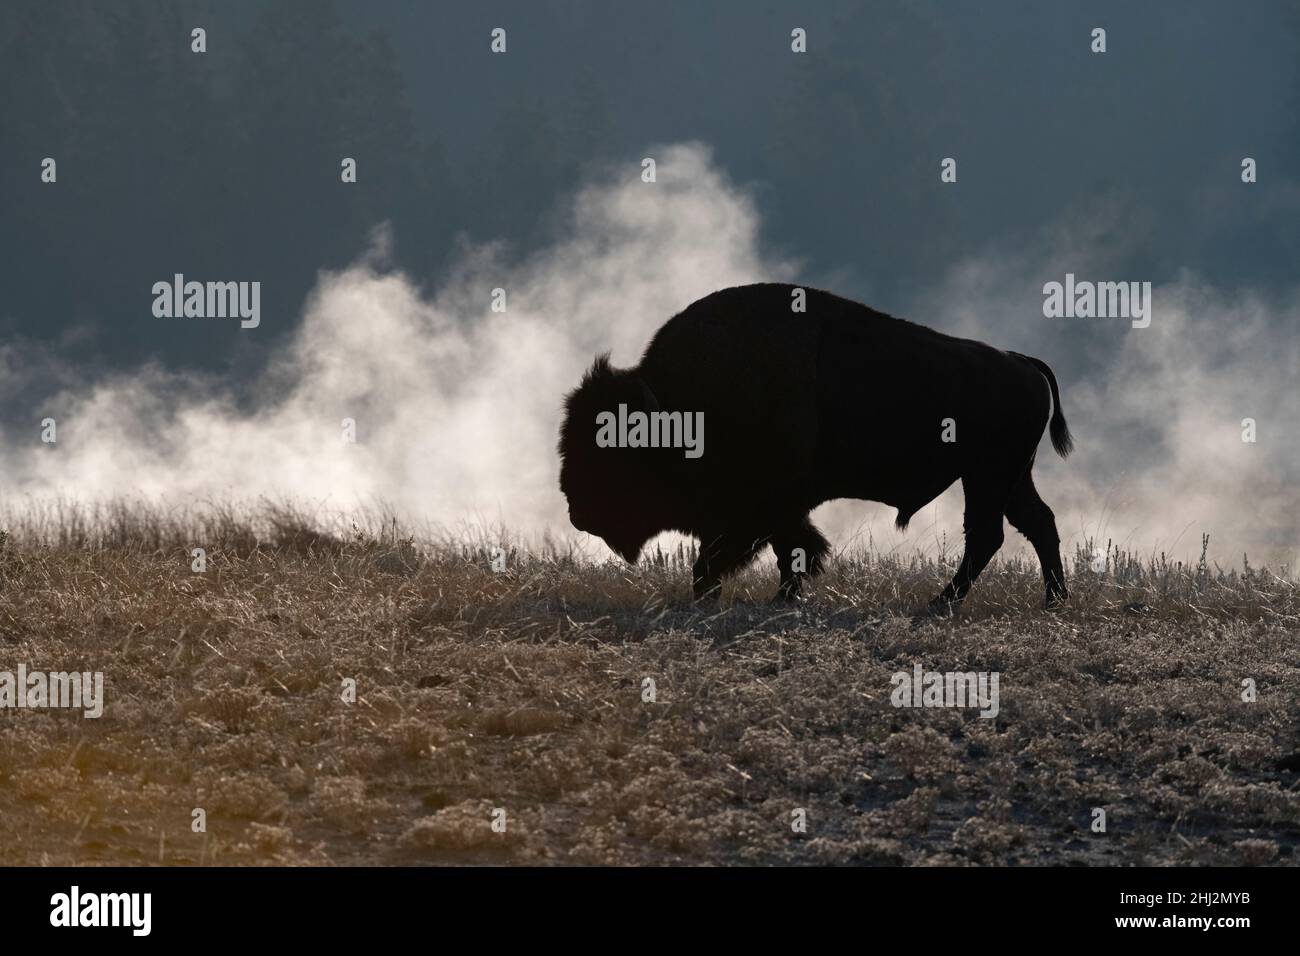 An American Buffalo (Bison bison) in a thermal area of Yellowstone National Park, Wyoming, USA. Stock Photo